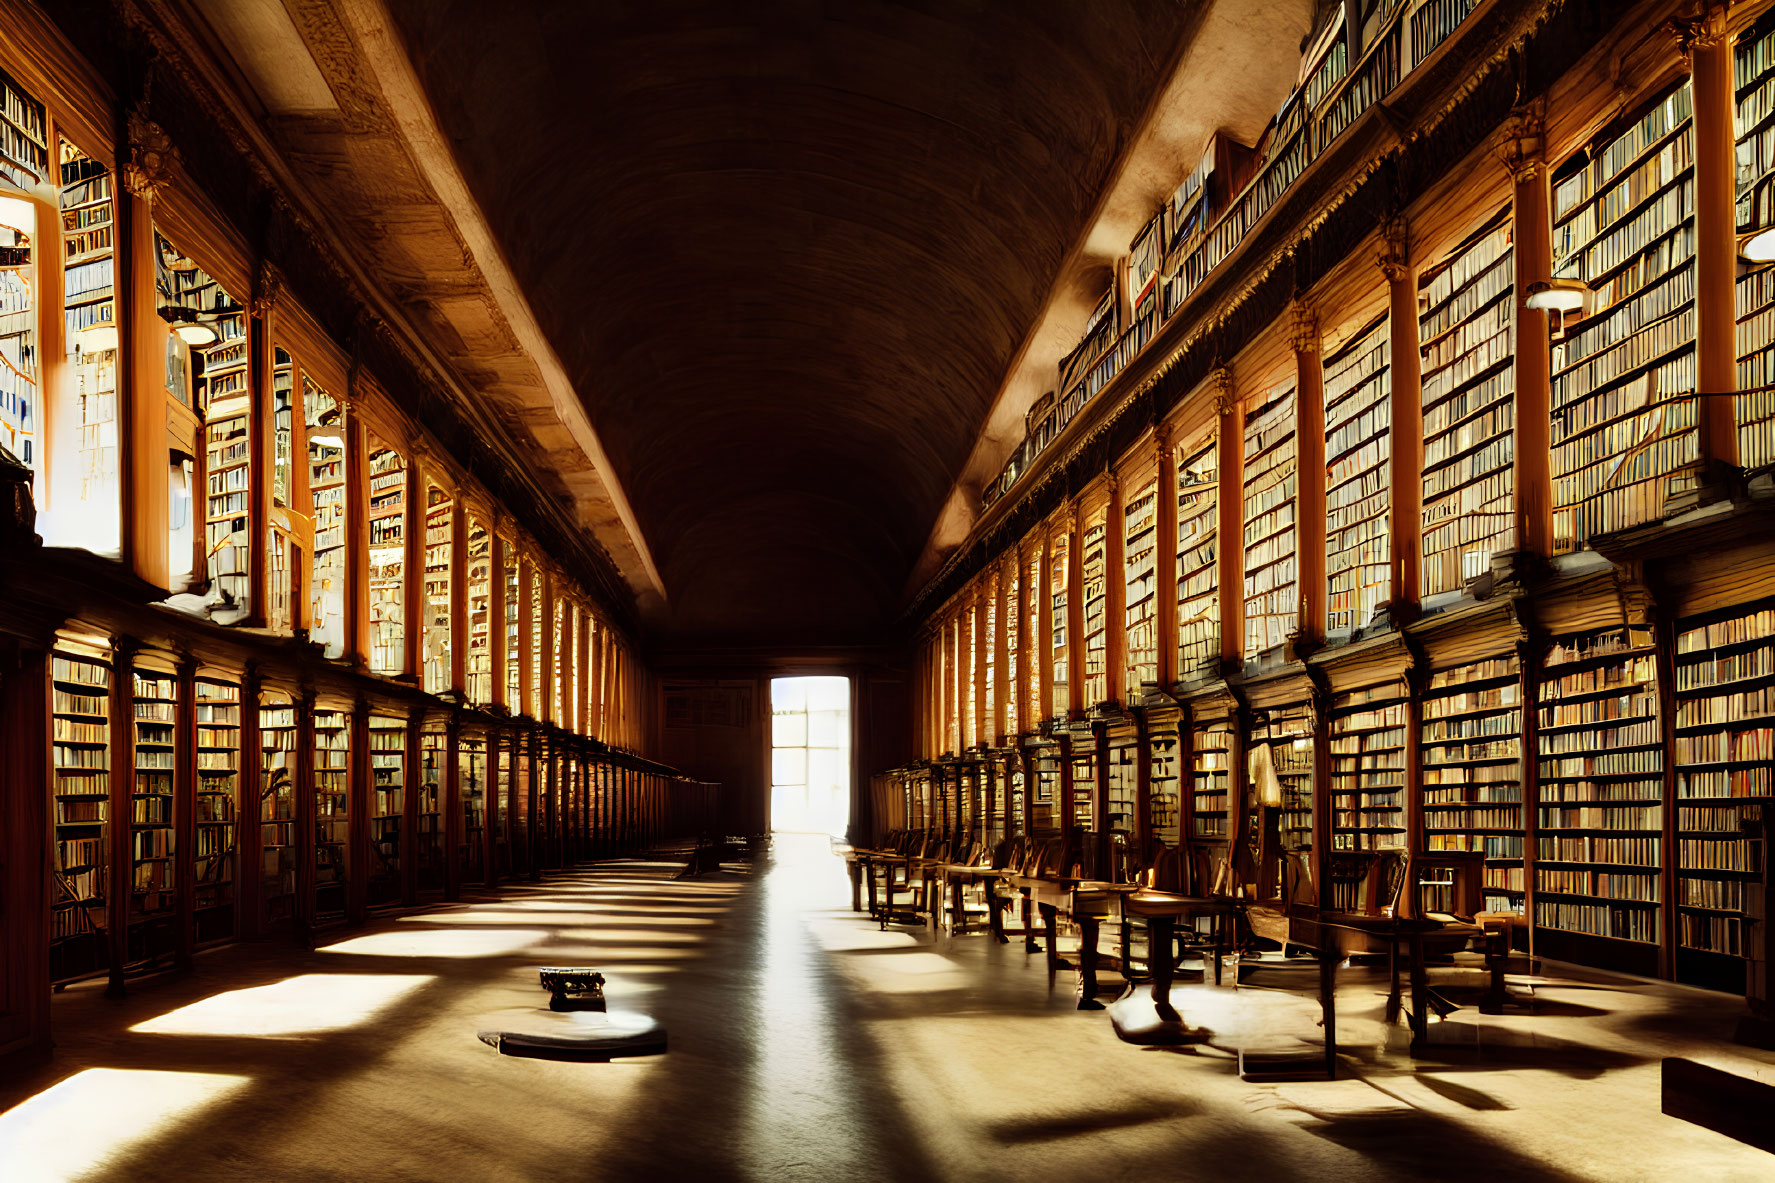 Classical library with wooden bookshelves and reading tables